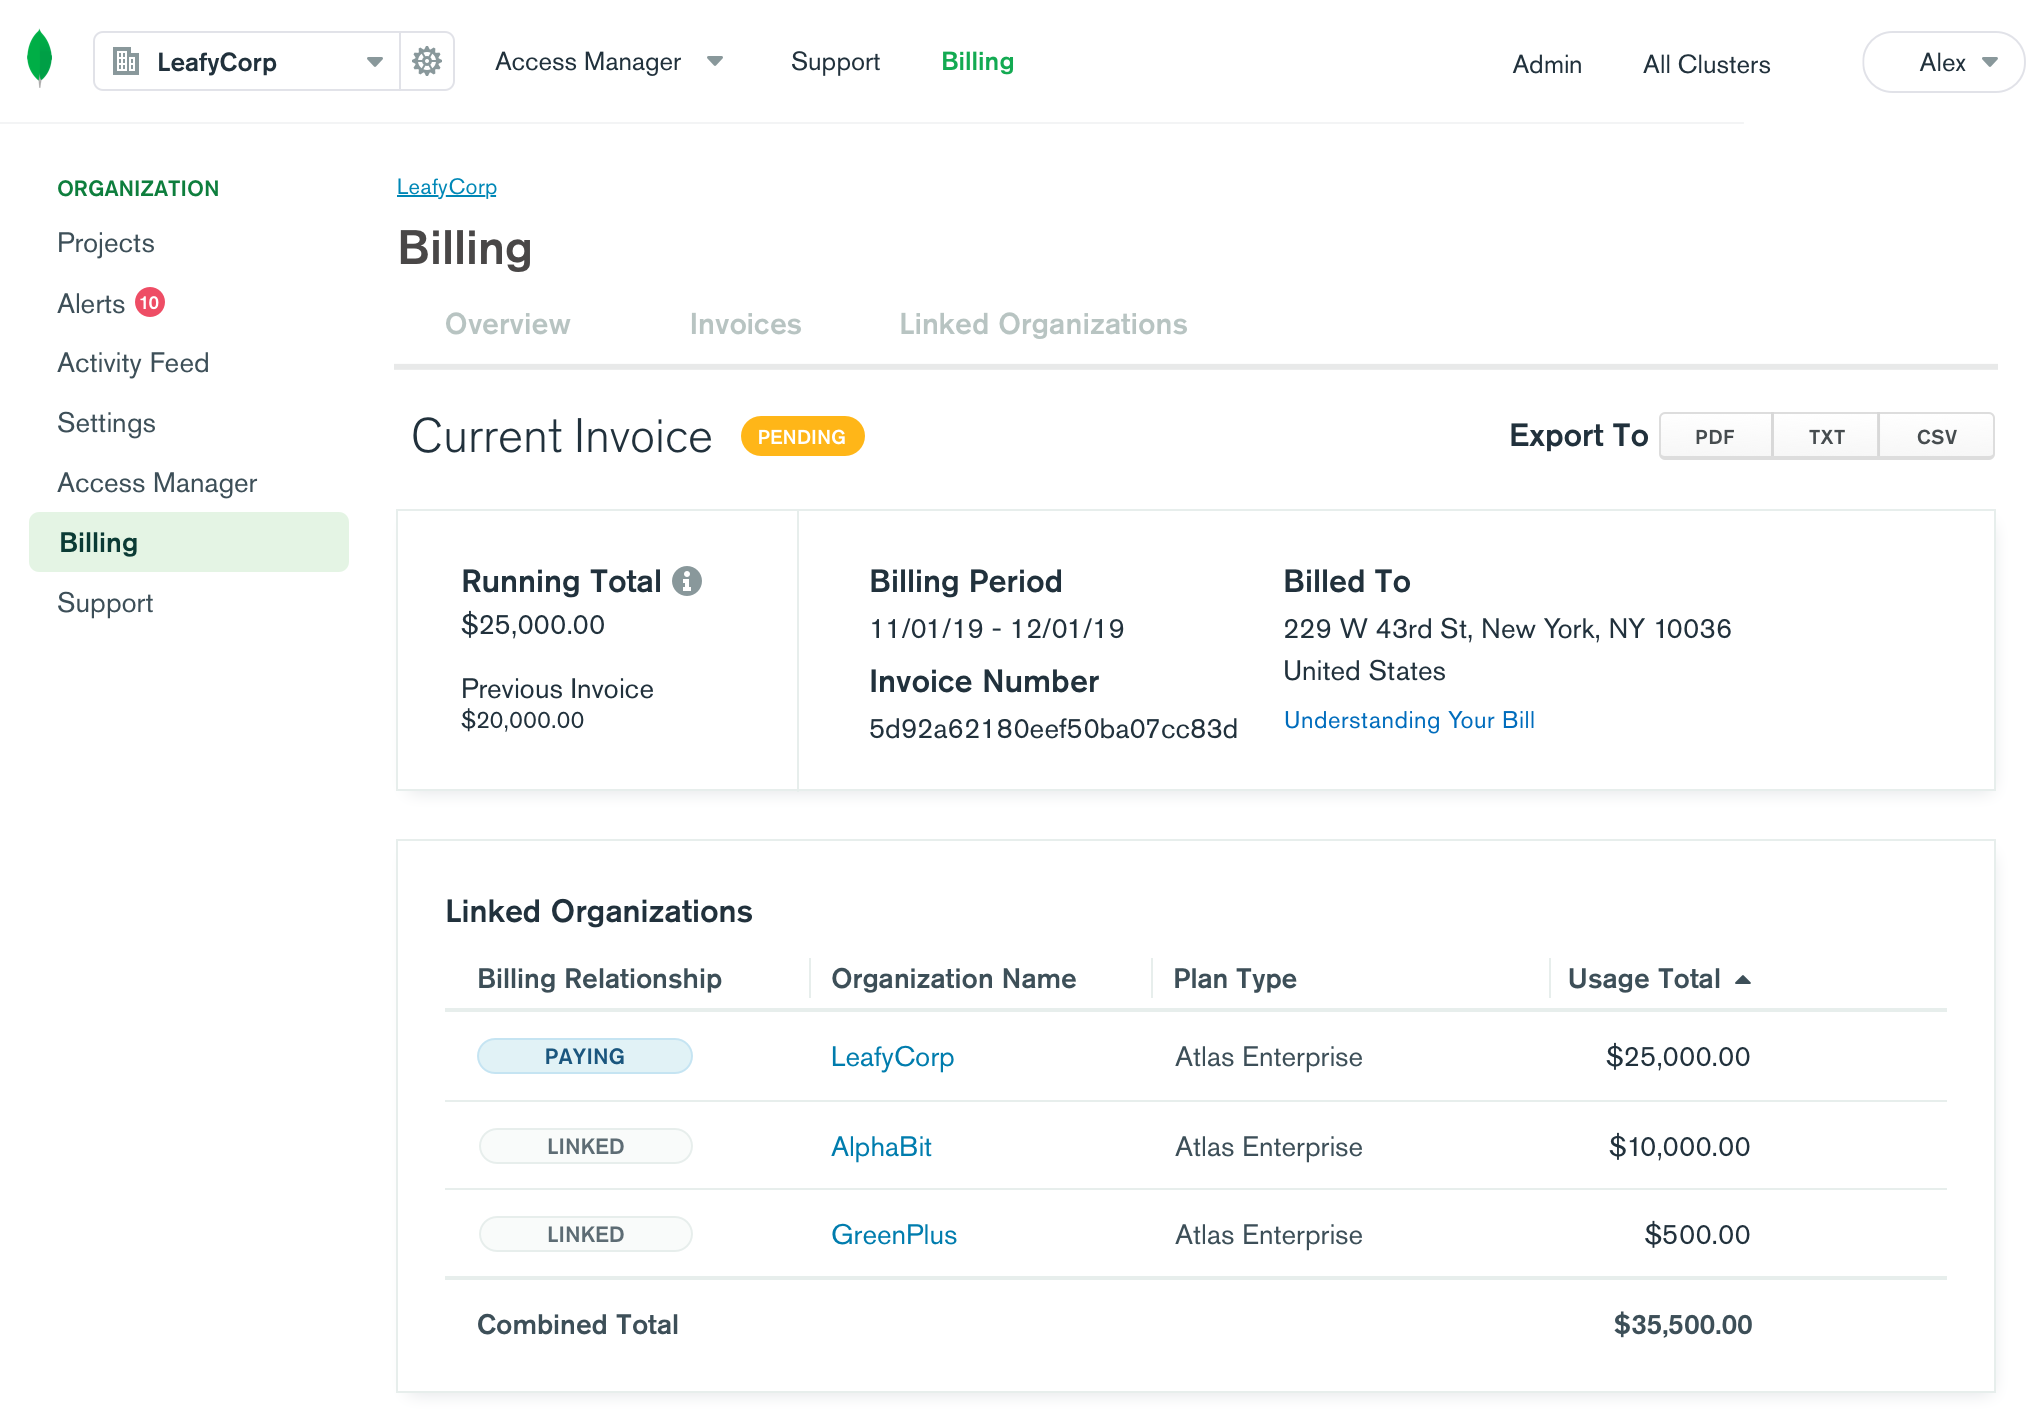 Link MongoDB Cloud organizations for a consolidated billing experience across teams.